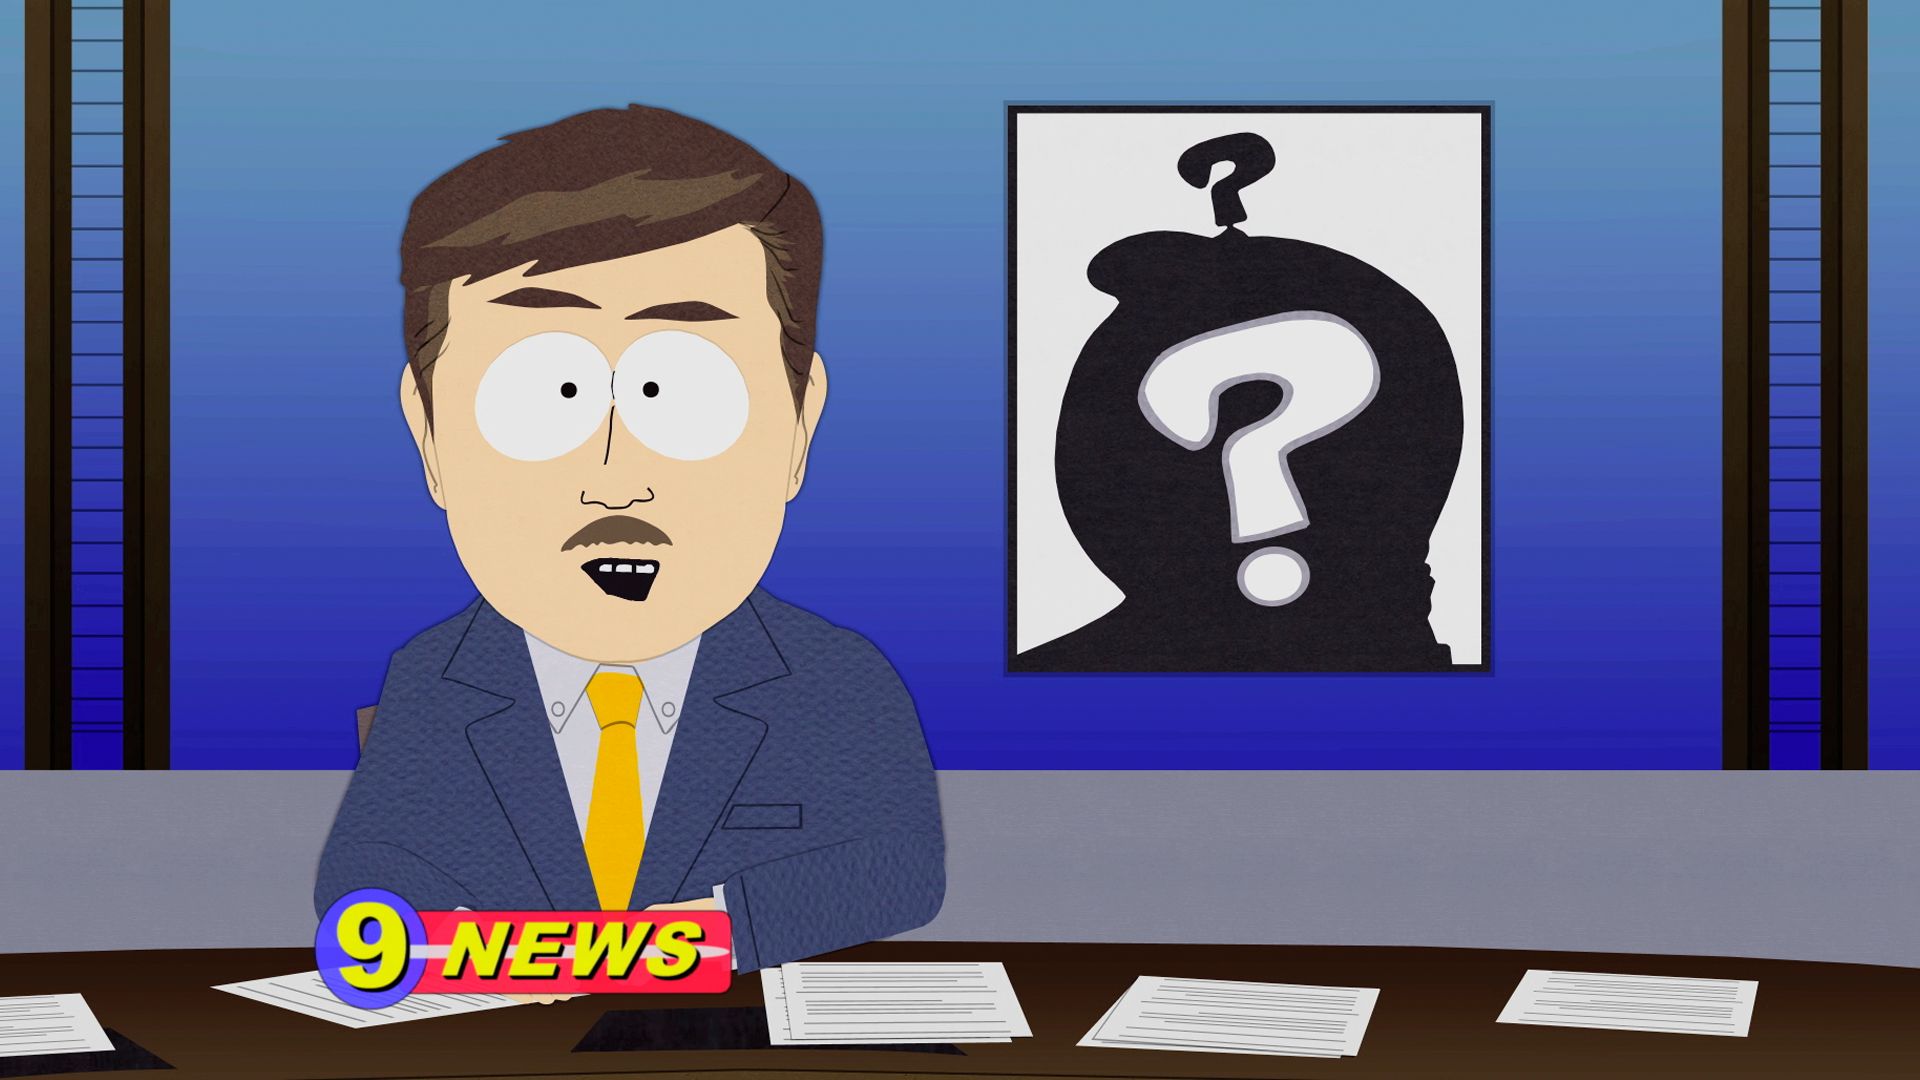 Who Is Mysterion? - Season 13 Episode 2 - South Park